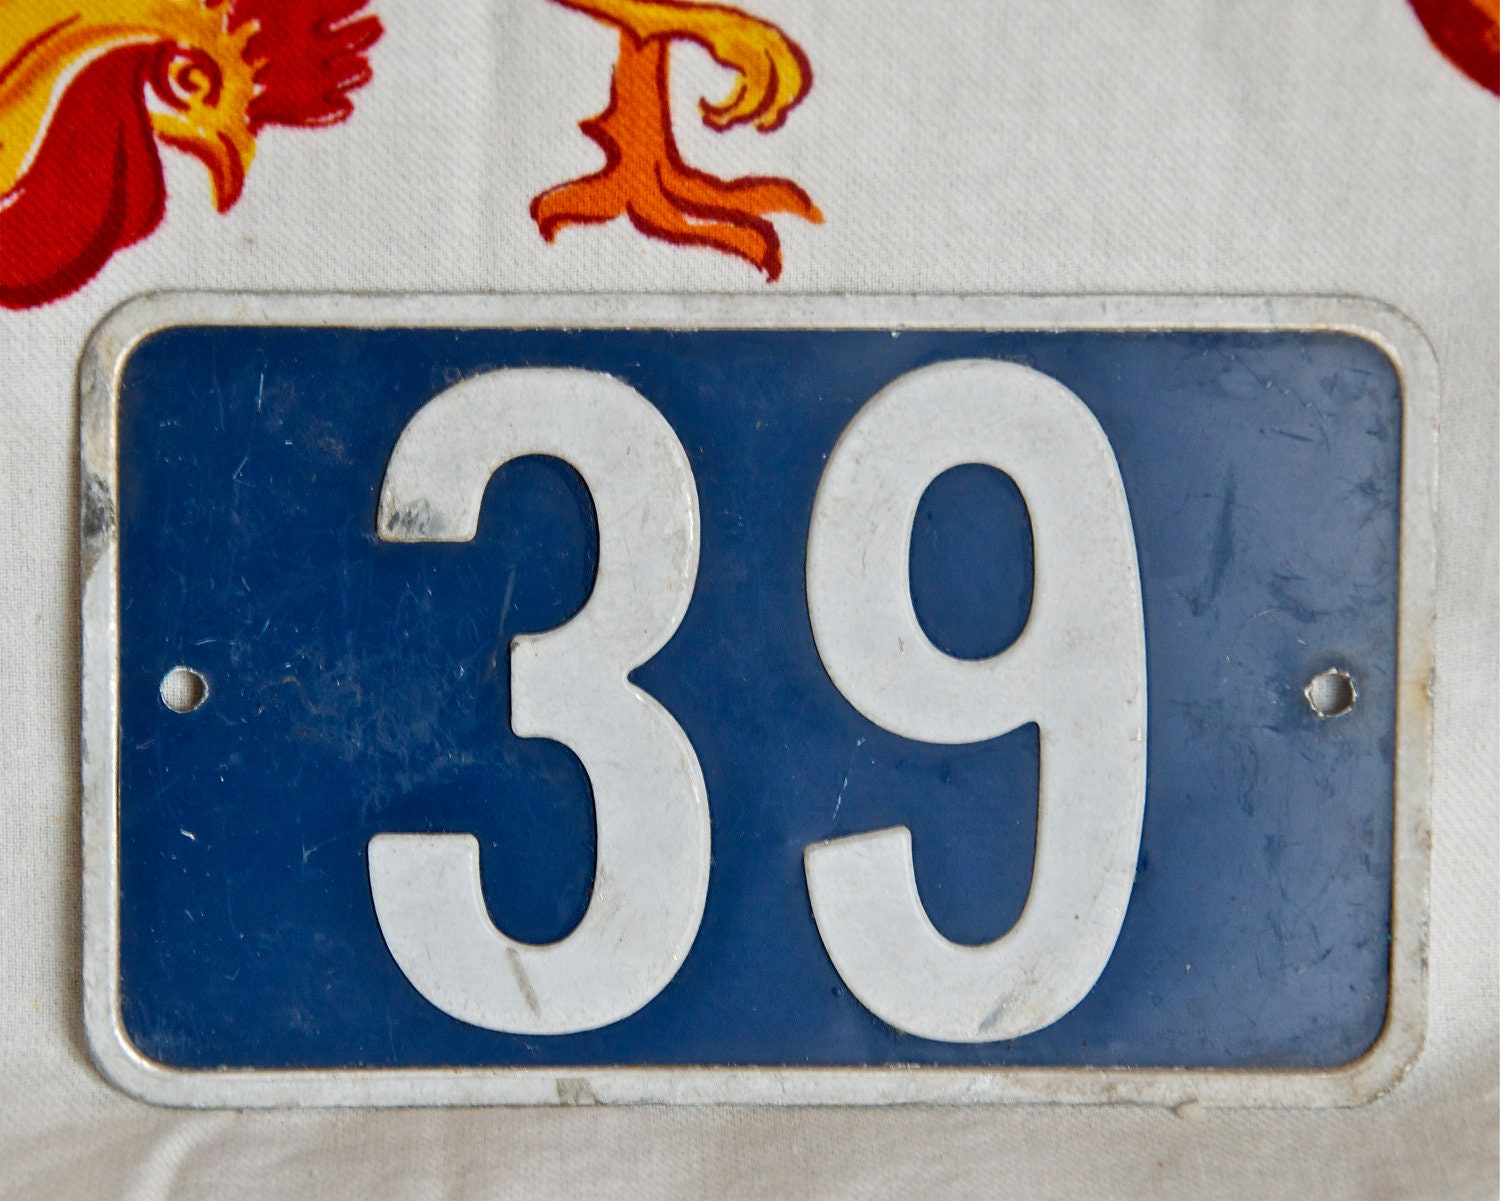 Vintage French enamel house number 39...blue and white...